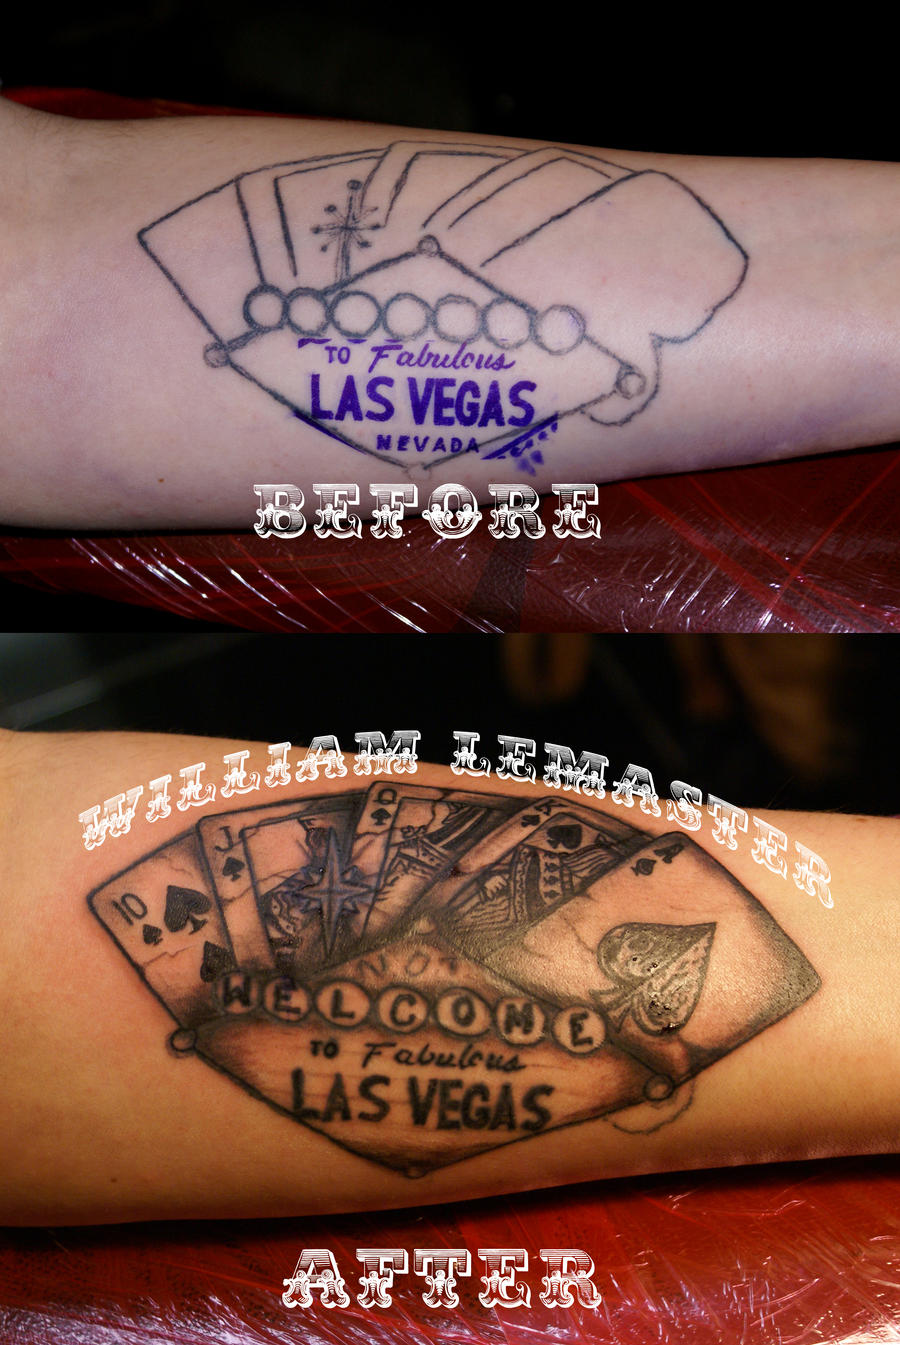 Tattoo Fix - Not Welcome to Las Vegas